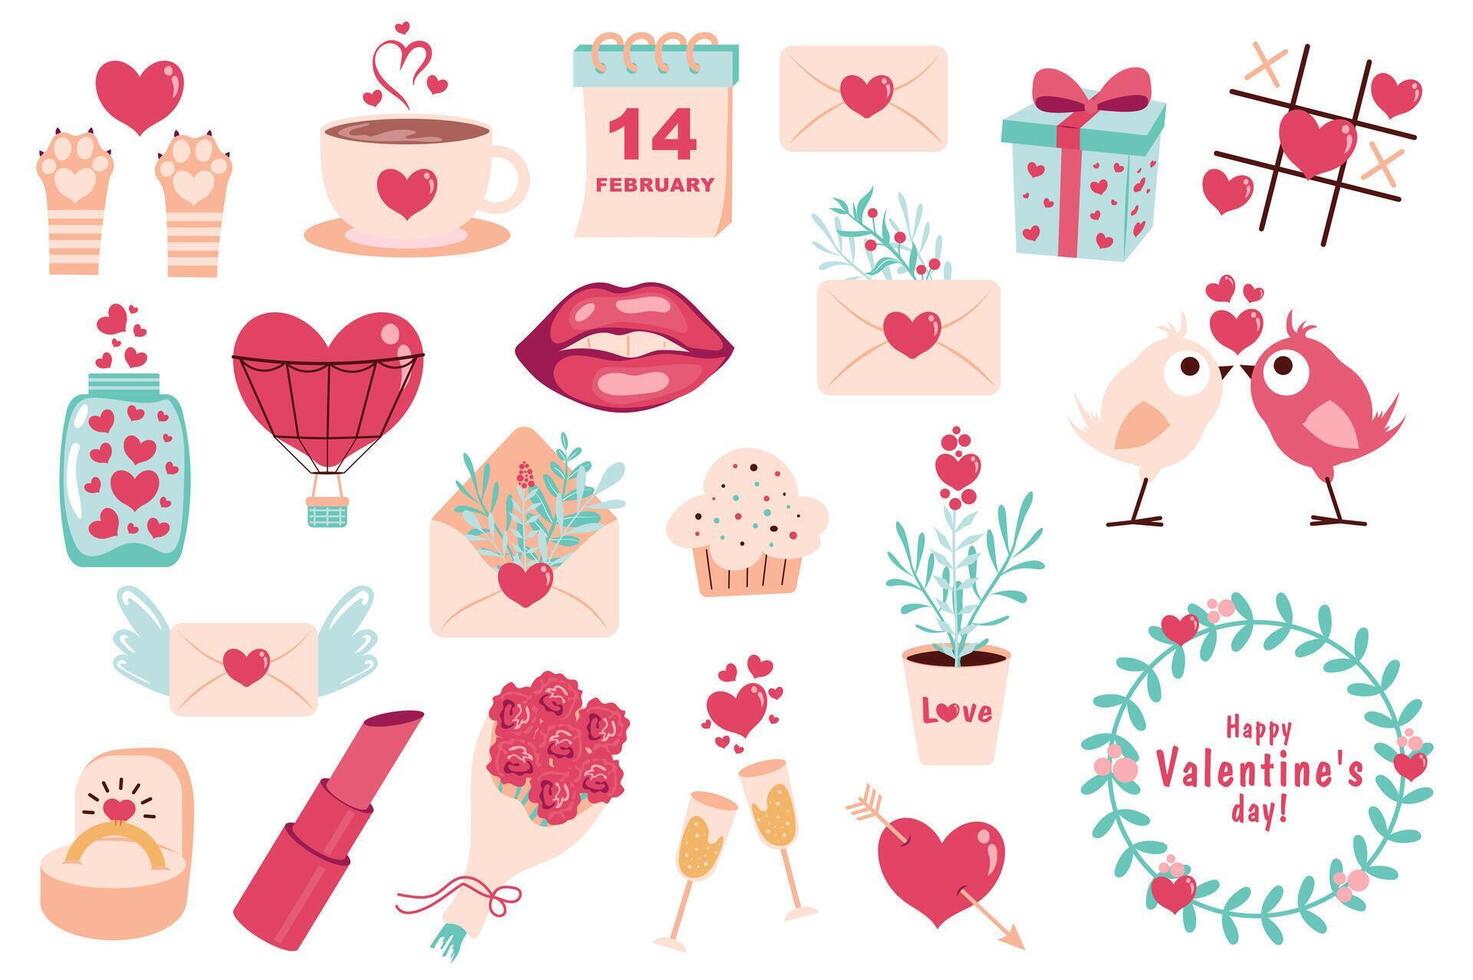 Valentine Day mega set in flat design. Bundle elements of hearts, cat paws, calendar date, love letter, kiss lips, hot air balloon, flowers, ring, other. Vector illustration isolated graphic objects